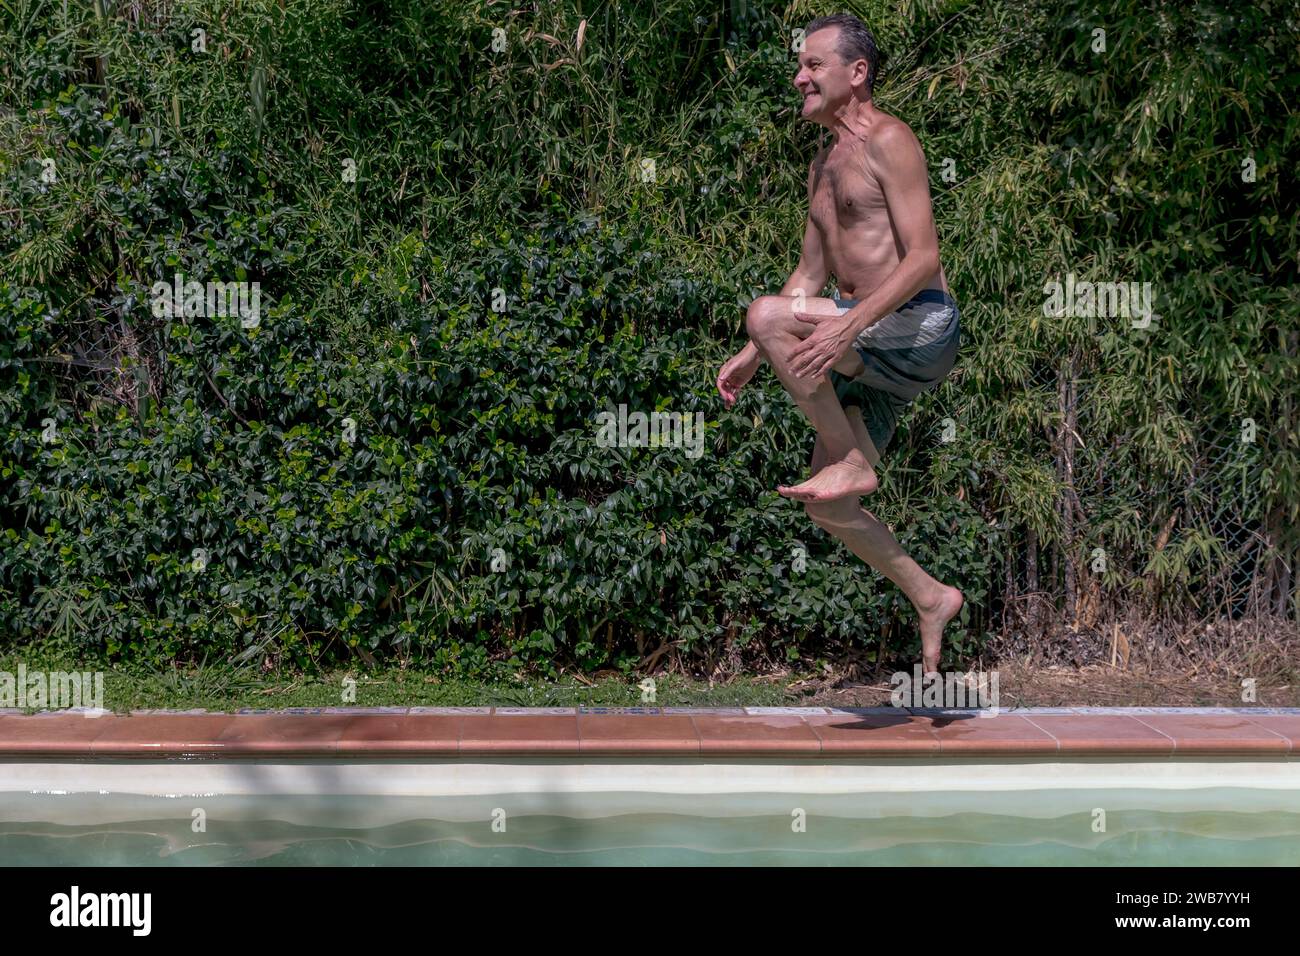 Middle-aged white man dives into the pool by jumping from the side edge with a funny expression Stock Photo